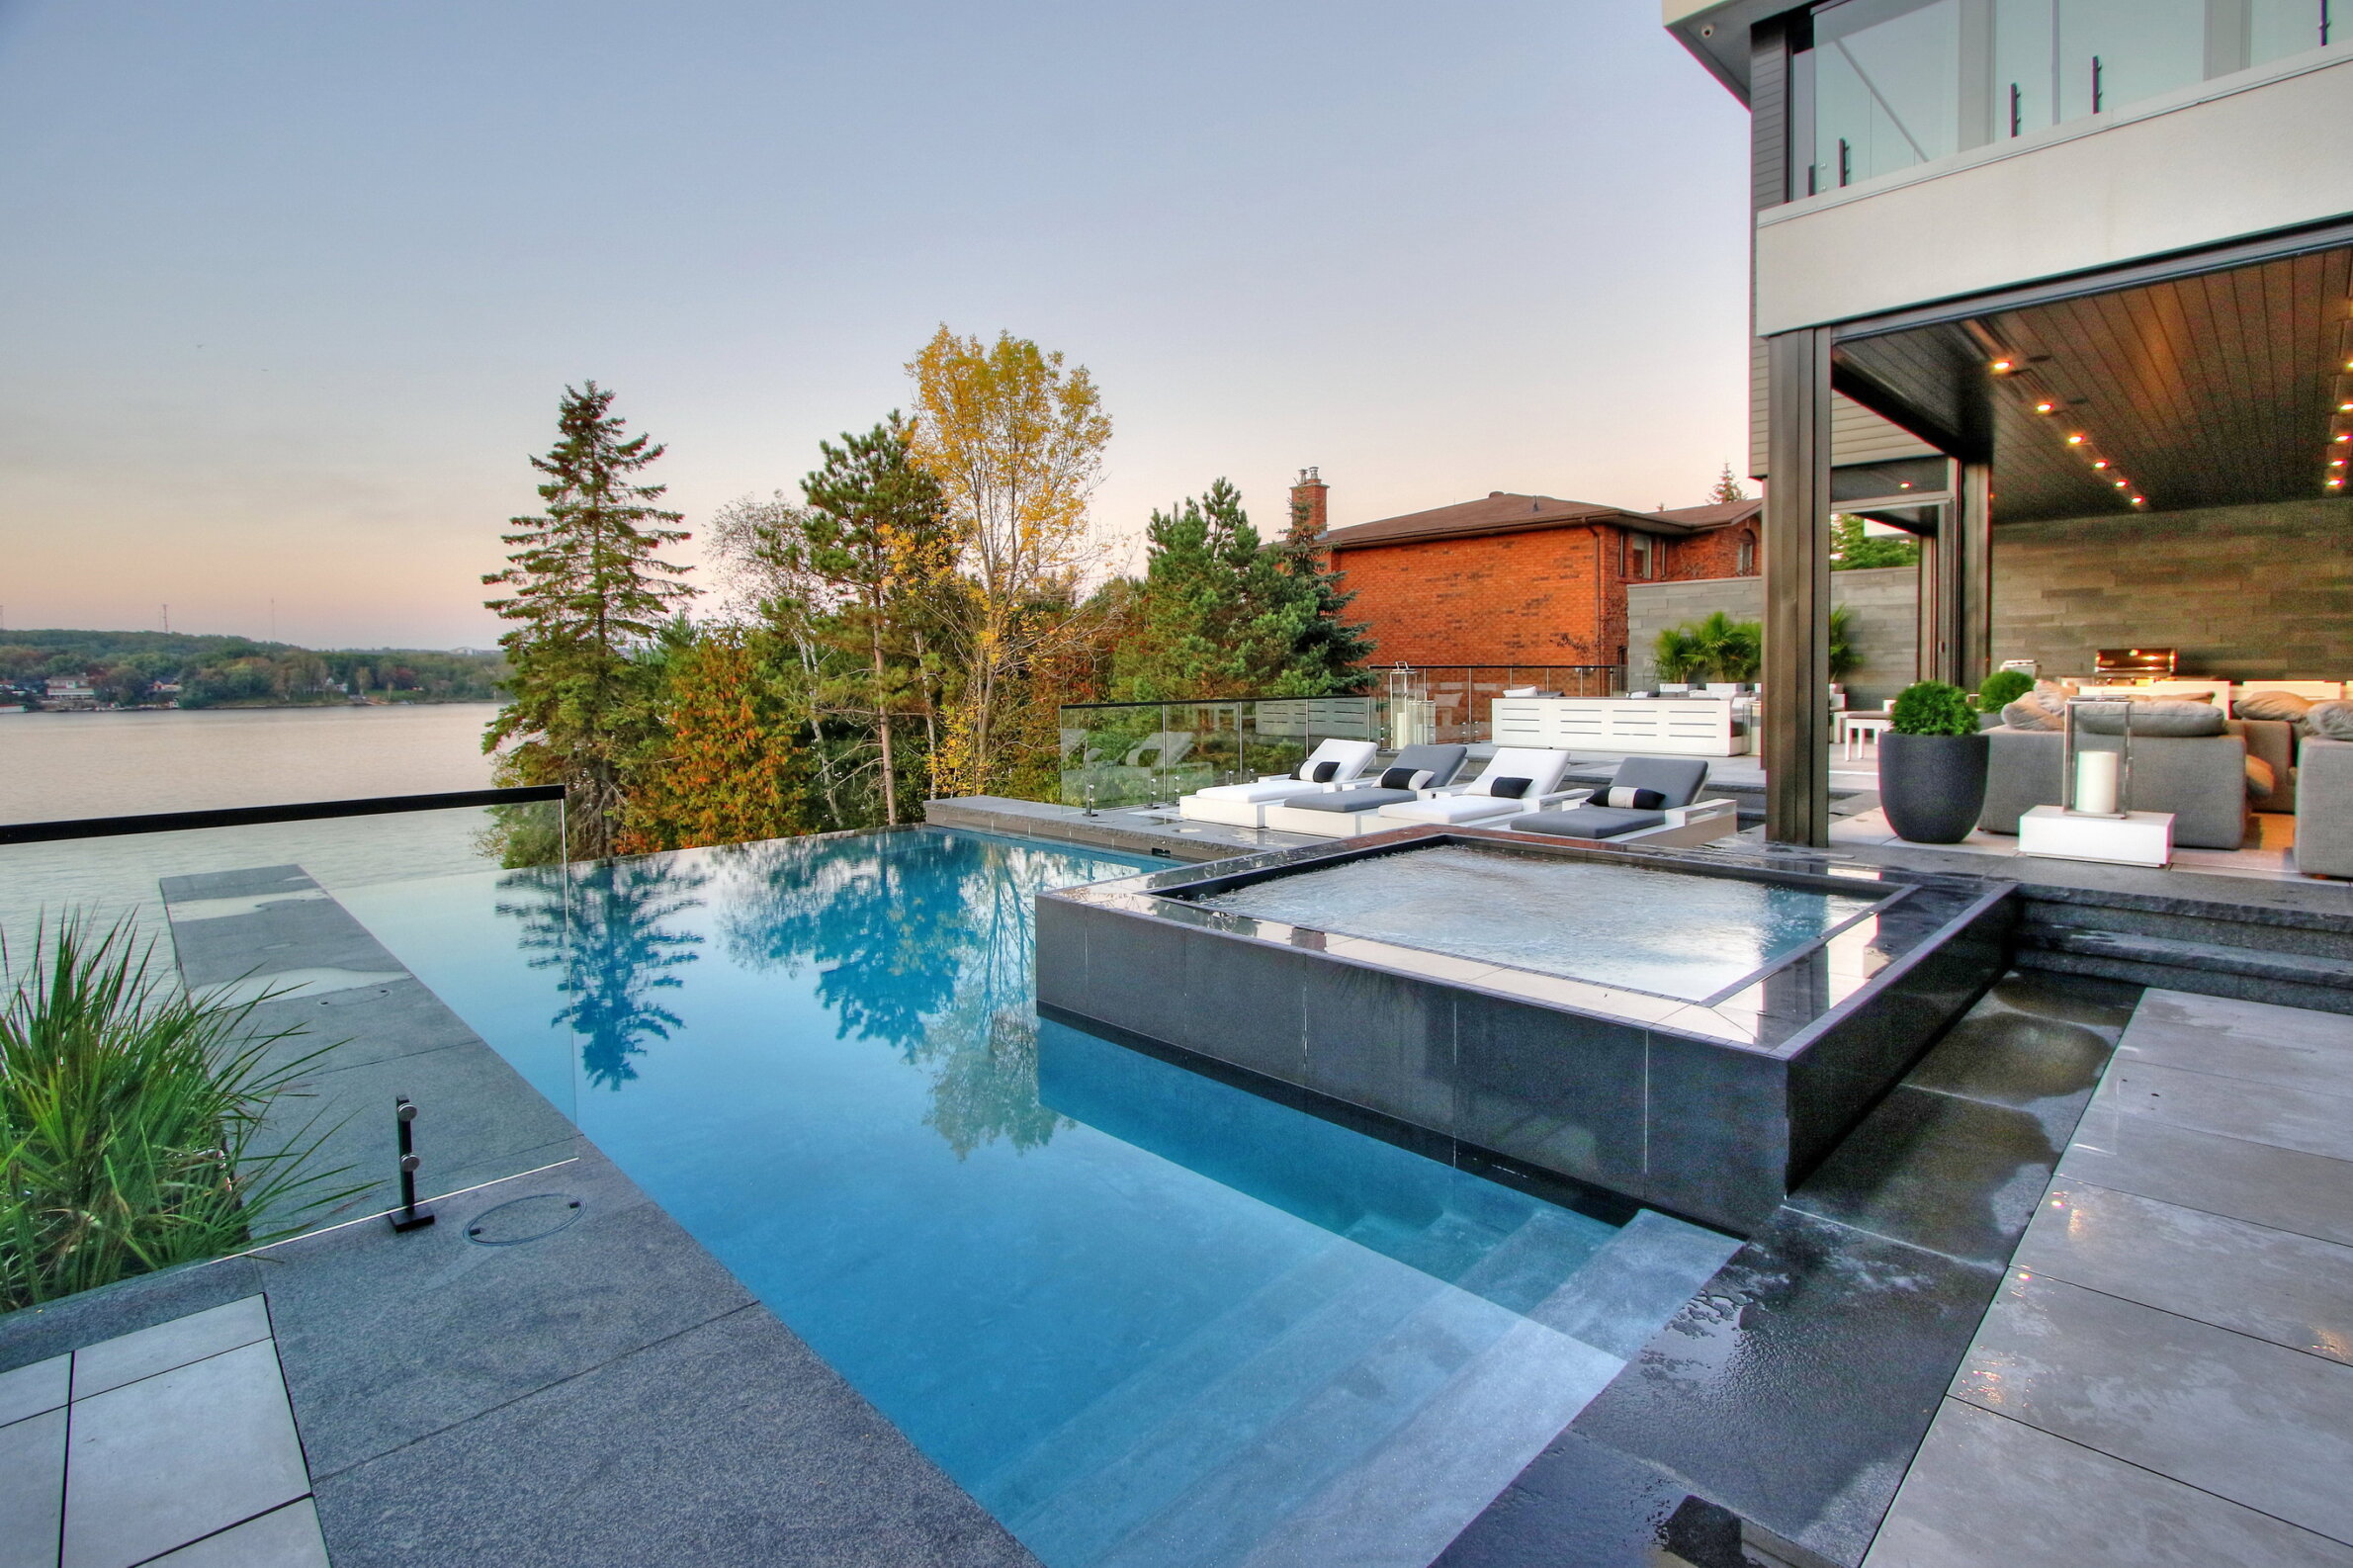 An outdoor infinity pool blending with a lake view, adjacent hot tub, loungers, and a cozy seating area with a fireplace. Modern luxury home setting.